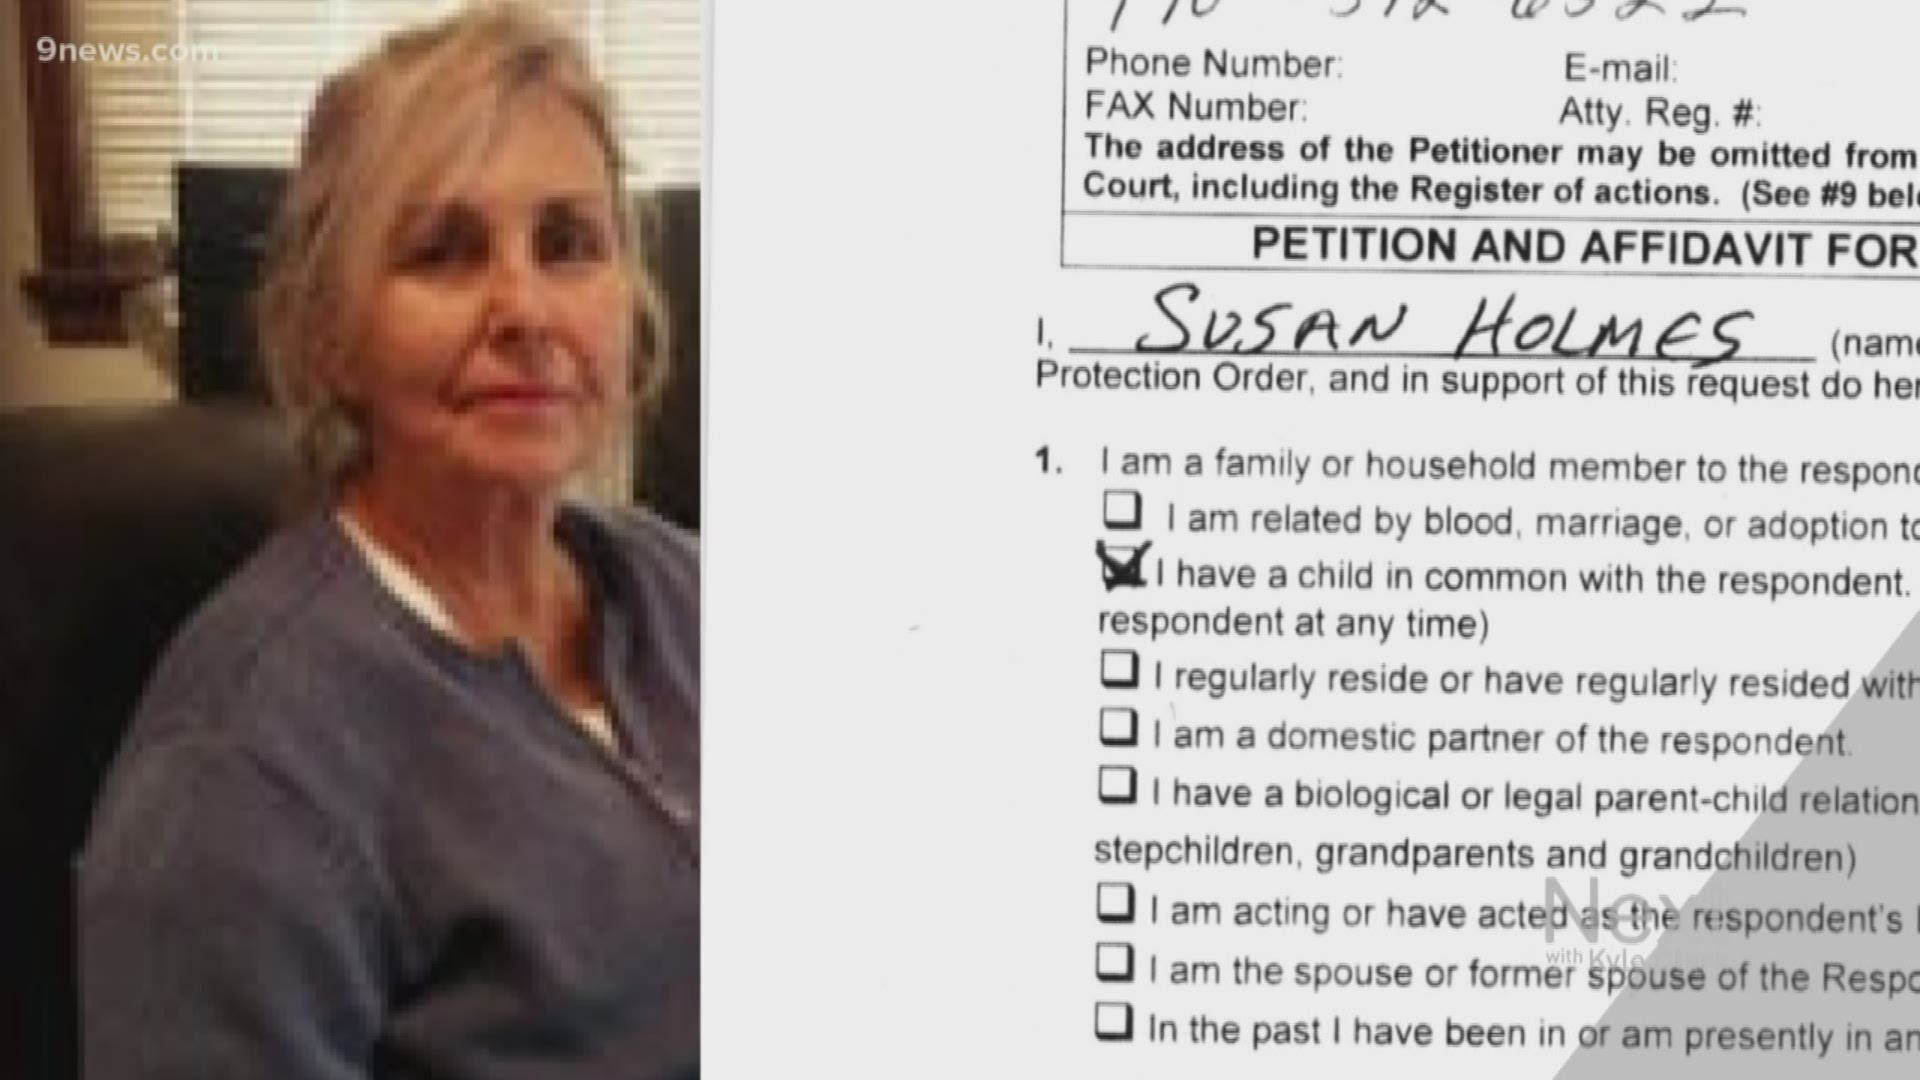 Susan Holmes, the mother who unsuccessfully tried to use Colorado's Red Flag gun law to disarm the officer who killed her son, is wanted for perjury.